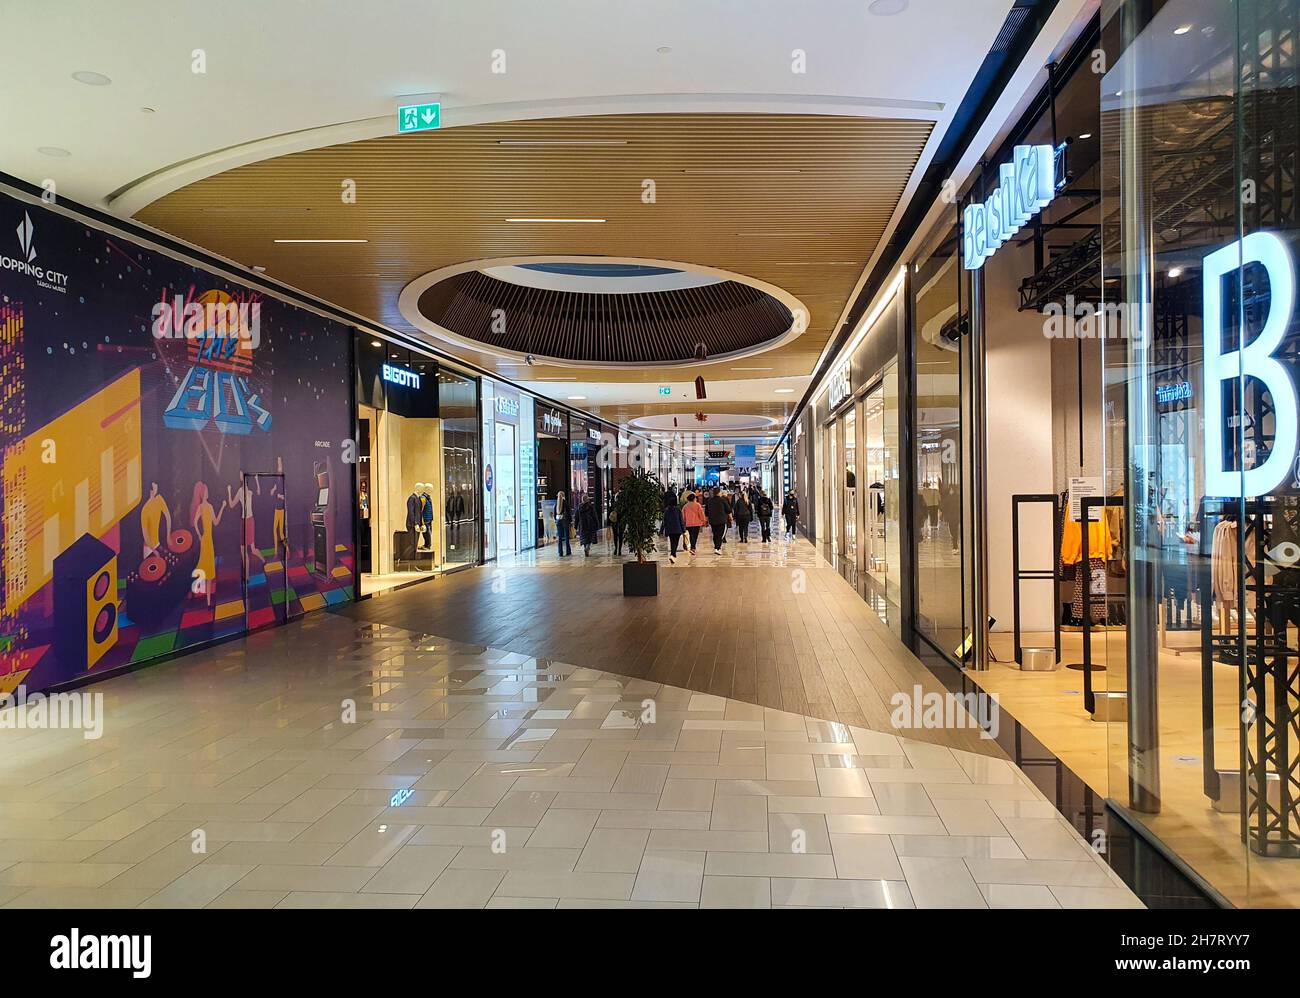 TARGU MURE, ROMANIA - Oct 24, 2021: A beautiiful view from Inside the  modern Shopping Mall in Targu Mures city, Romania Stock Photo - Alamy